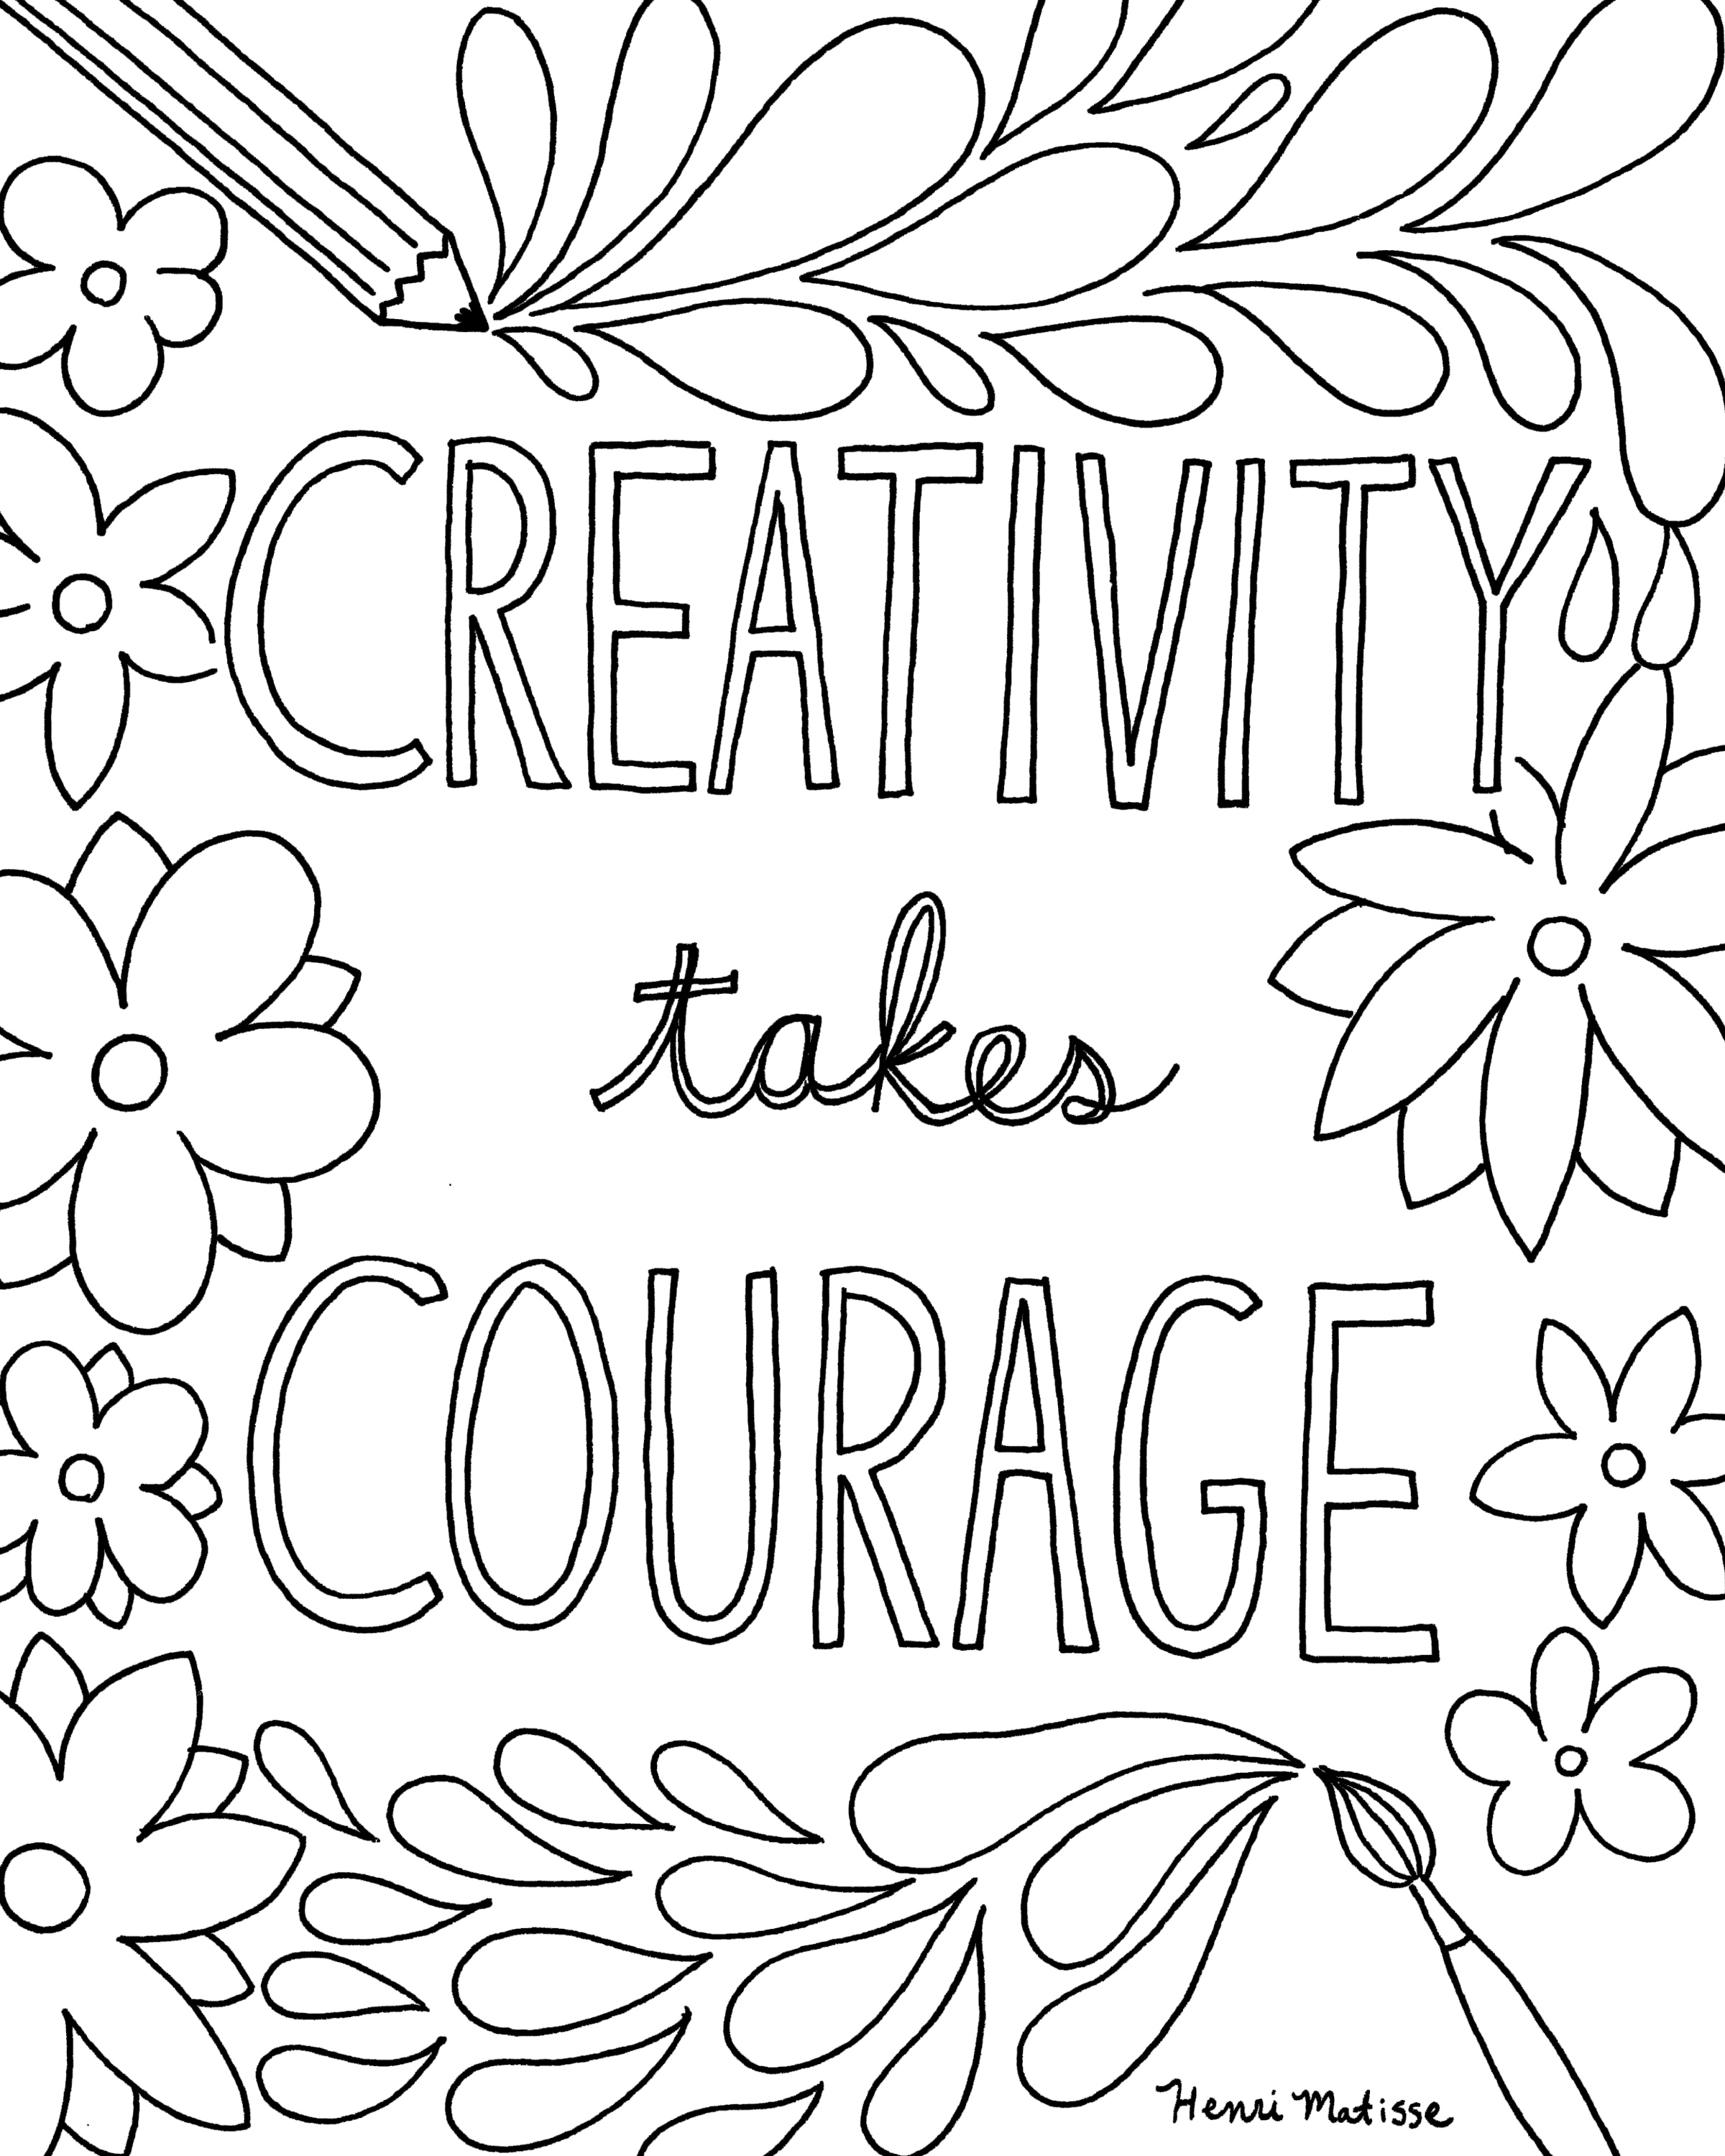 Download Quote Coloring Pages for Adults and Teens - Best Coloring ...